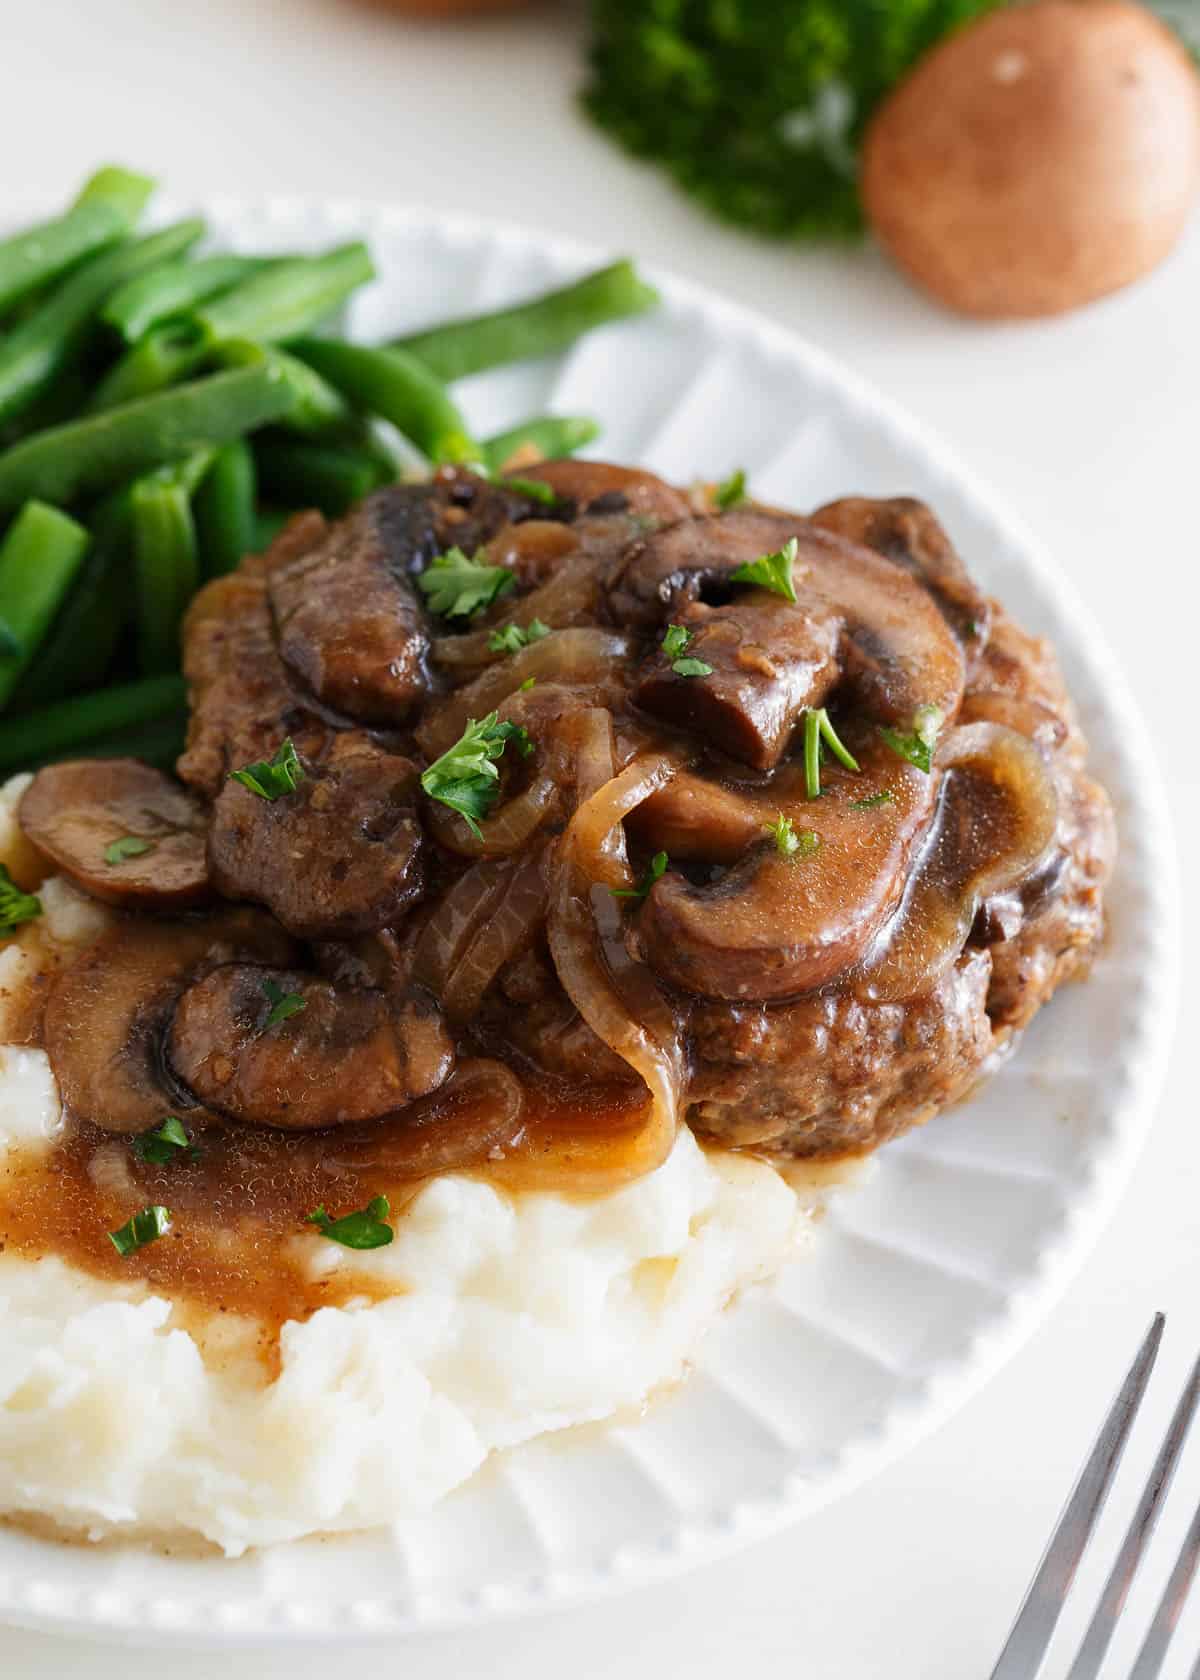 Salisbury steak with mushroom gravy with mashed potatoes and green beans.